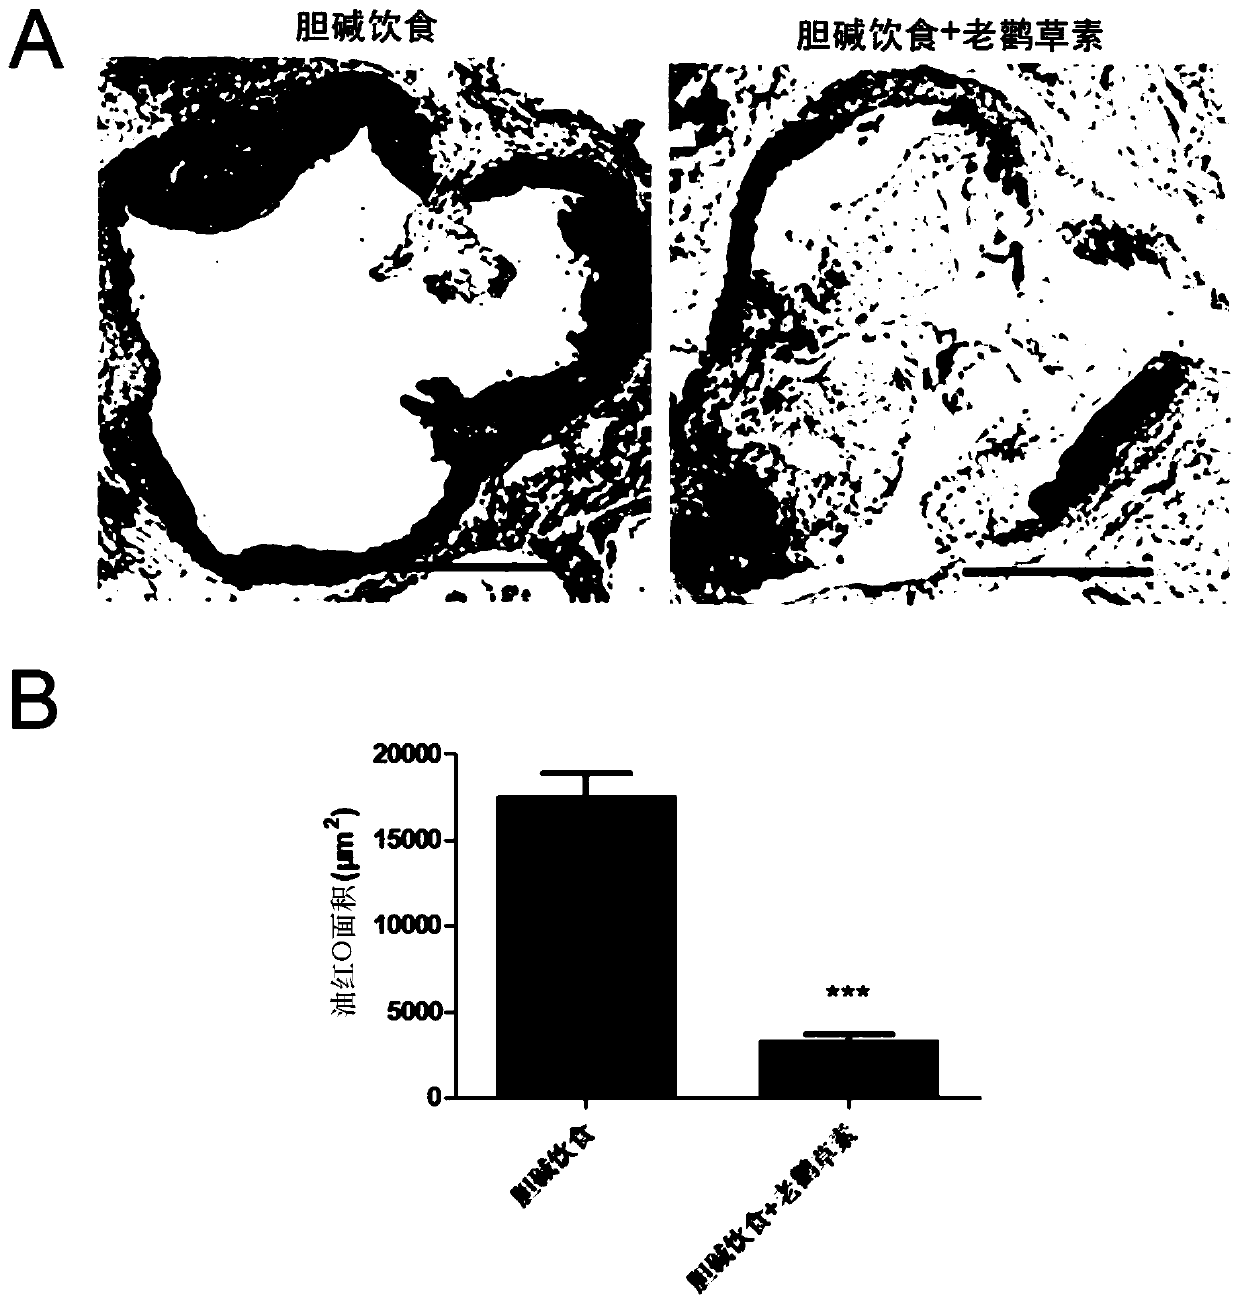 Application of geraniin in preparation of drugs to prevent or treat atherosclerosis